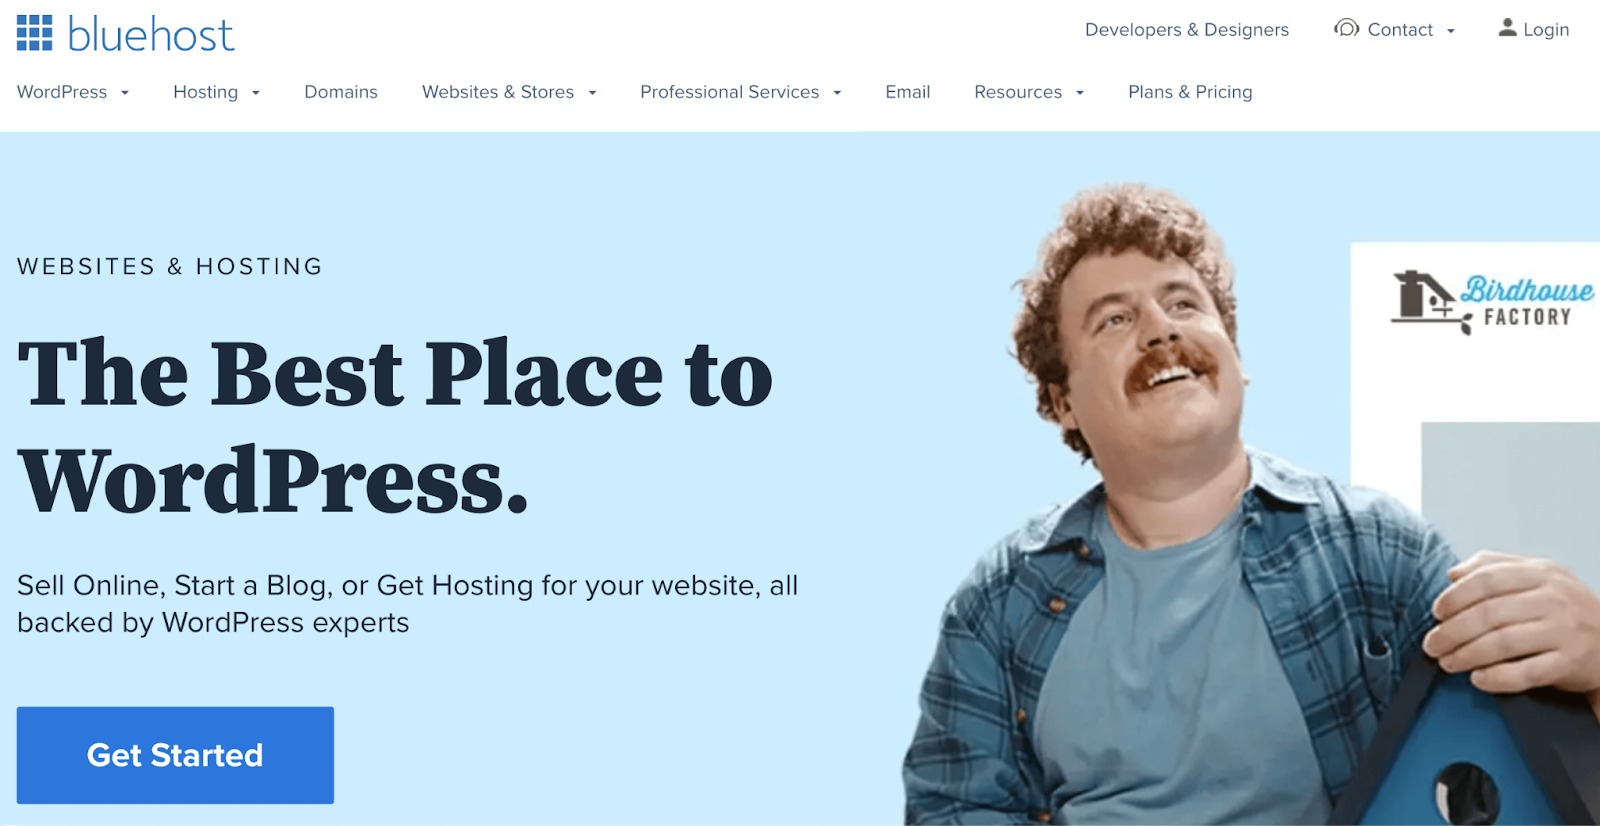 Bluehost homepage with the tagline, "The best place to WordPress"